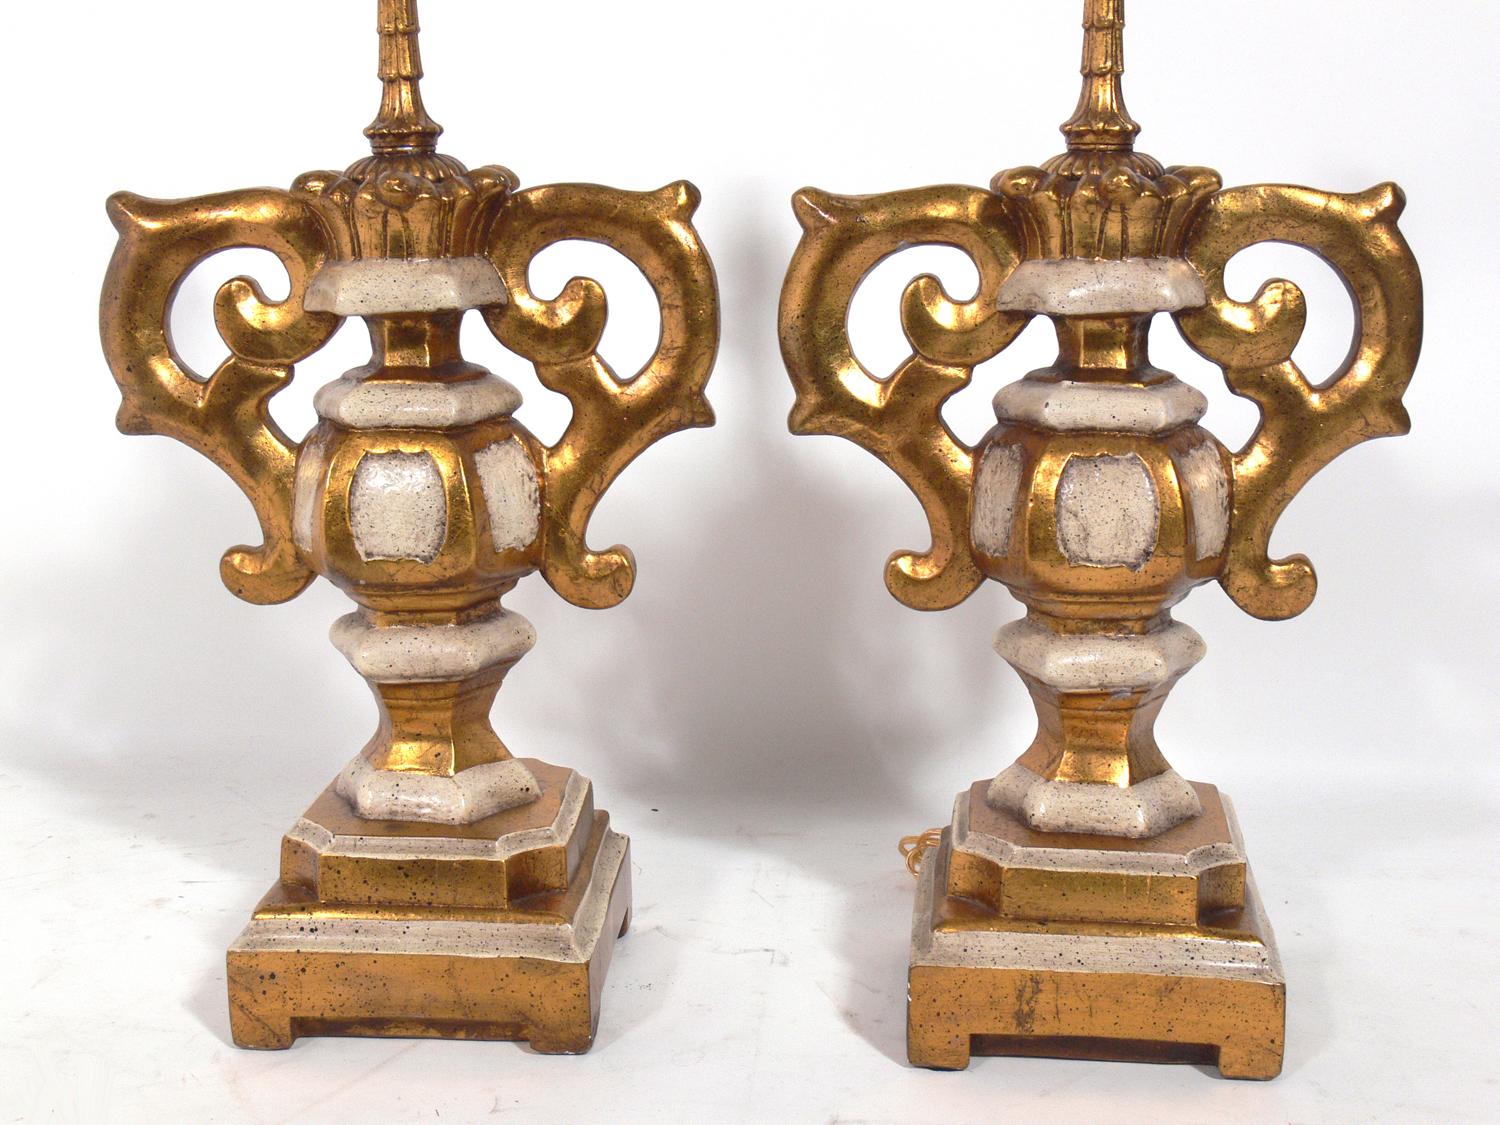 Italian gilt plaster urn lamps, Italy, circa 1950s. They have been rewired and are ready to use. The price and measurements noted includes the shades.